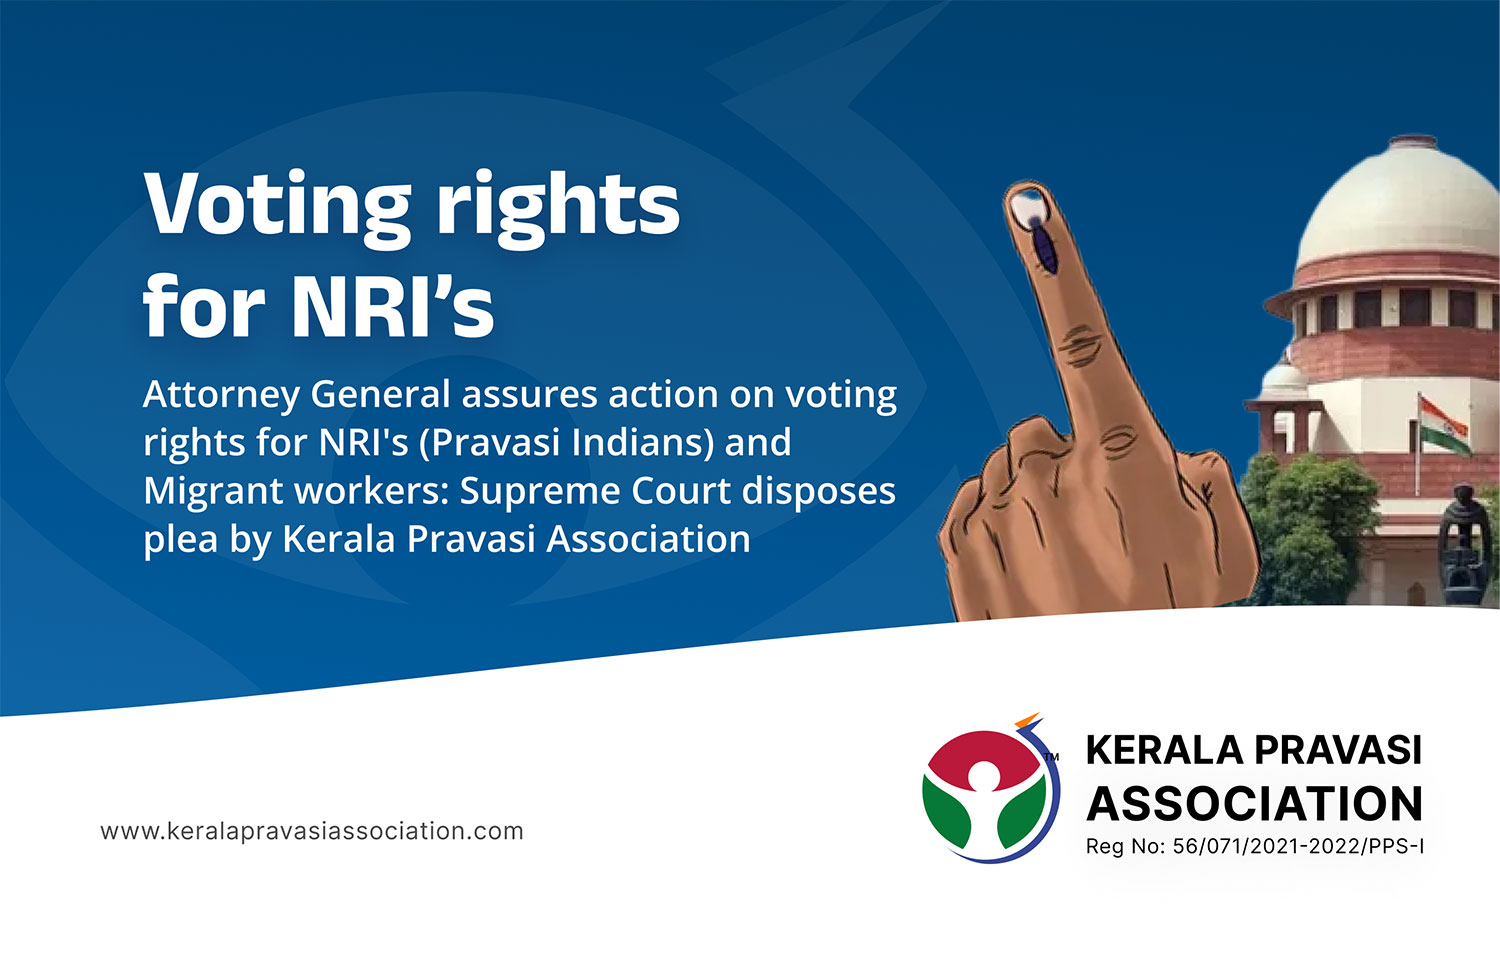 ‘Measures underway on expatriate suffrage’; Center announce its position on NRI voting rights